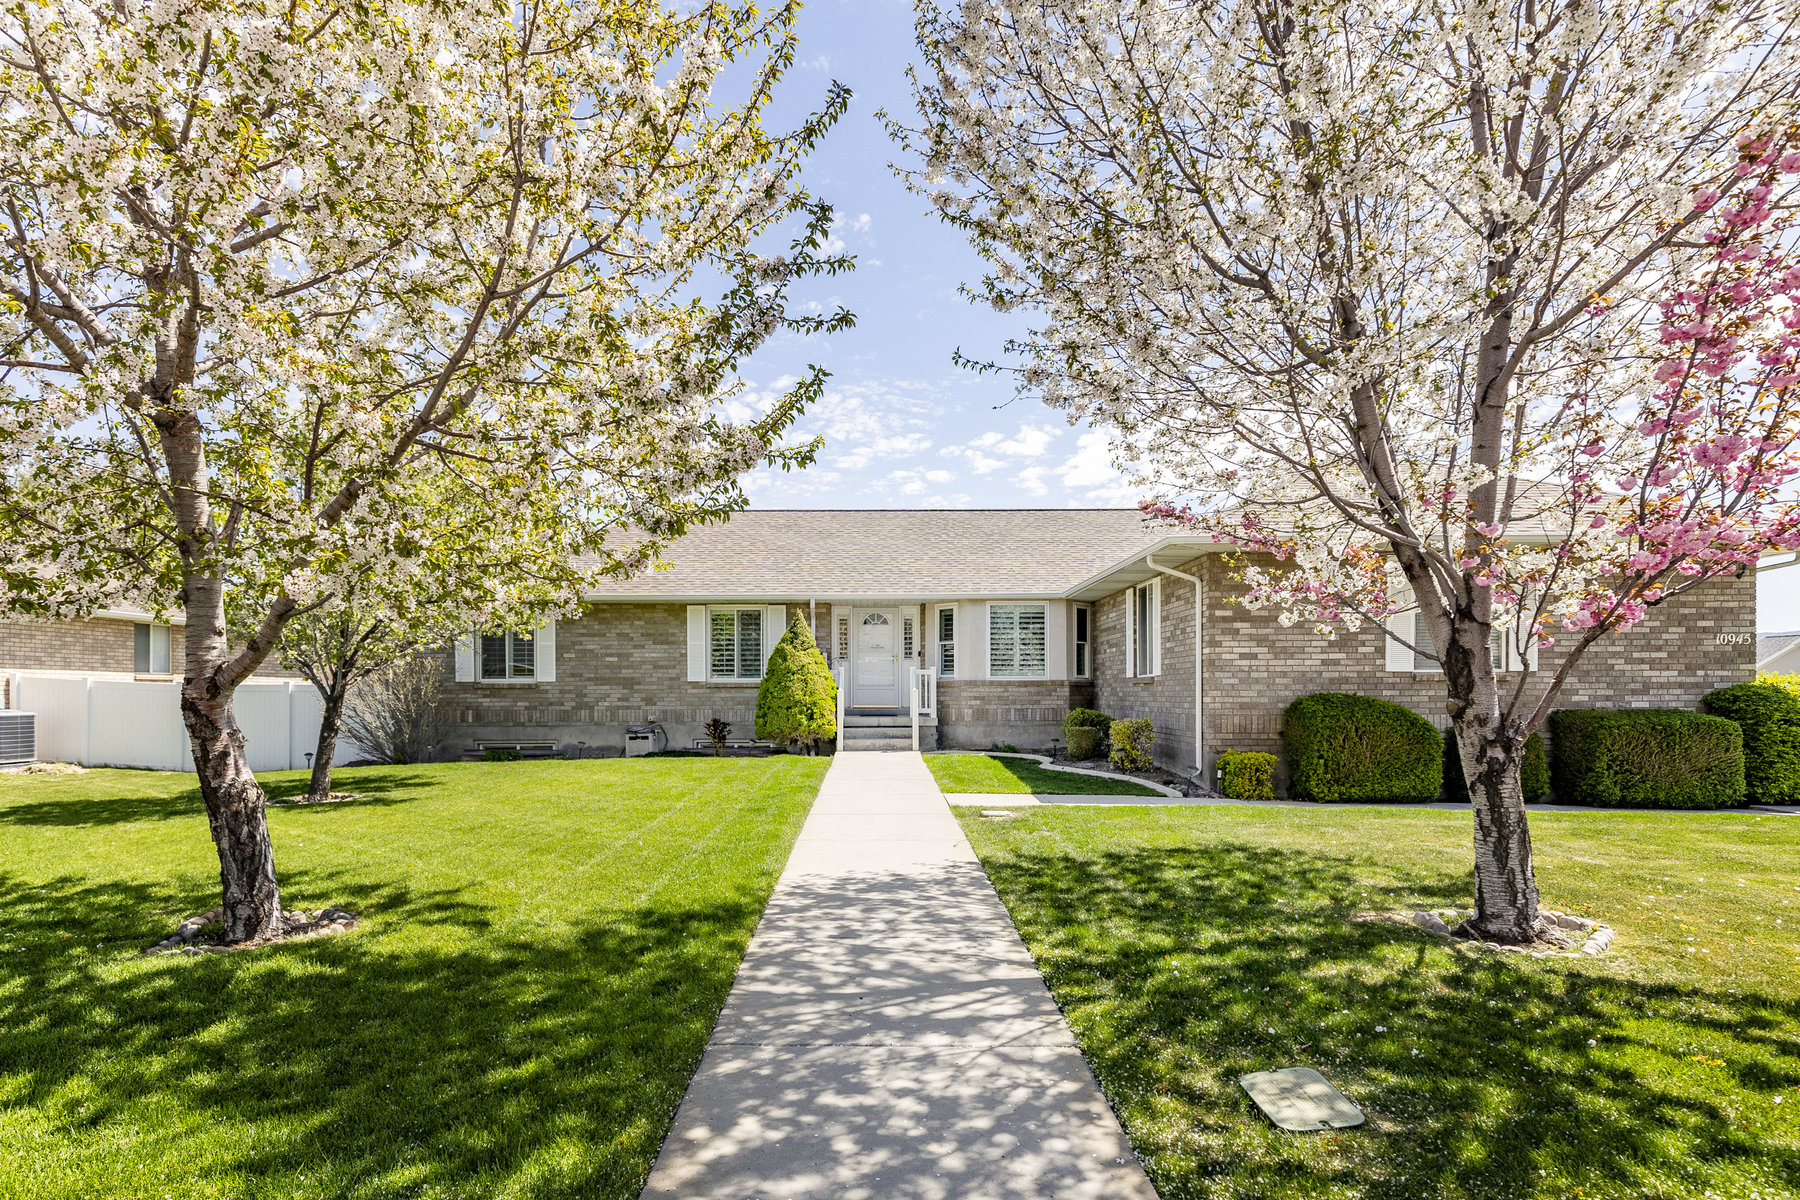 South Jordan Rambler Located in a Prime Location With Gorgeous Mountain Views